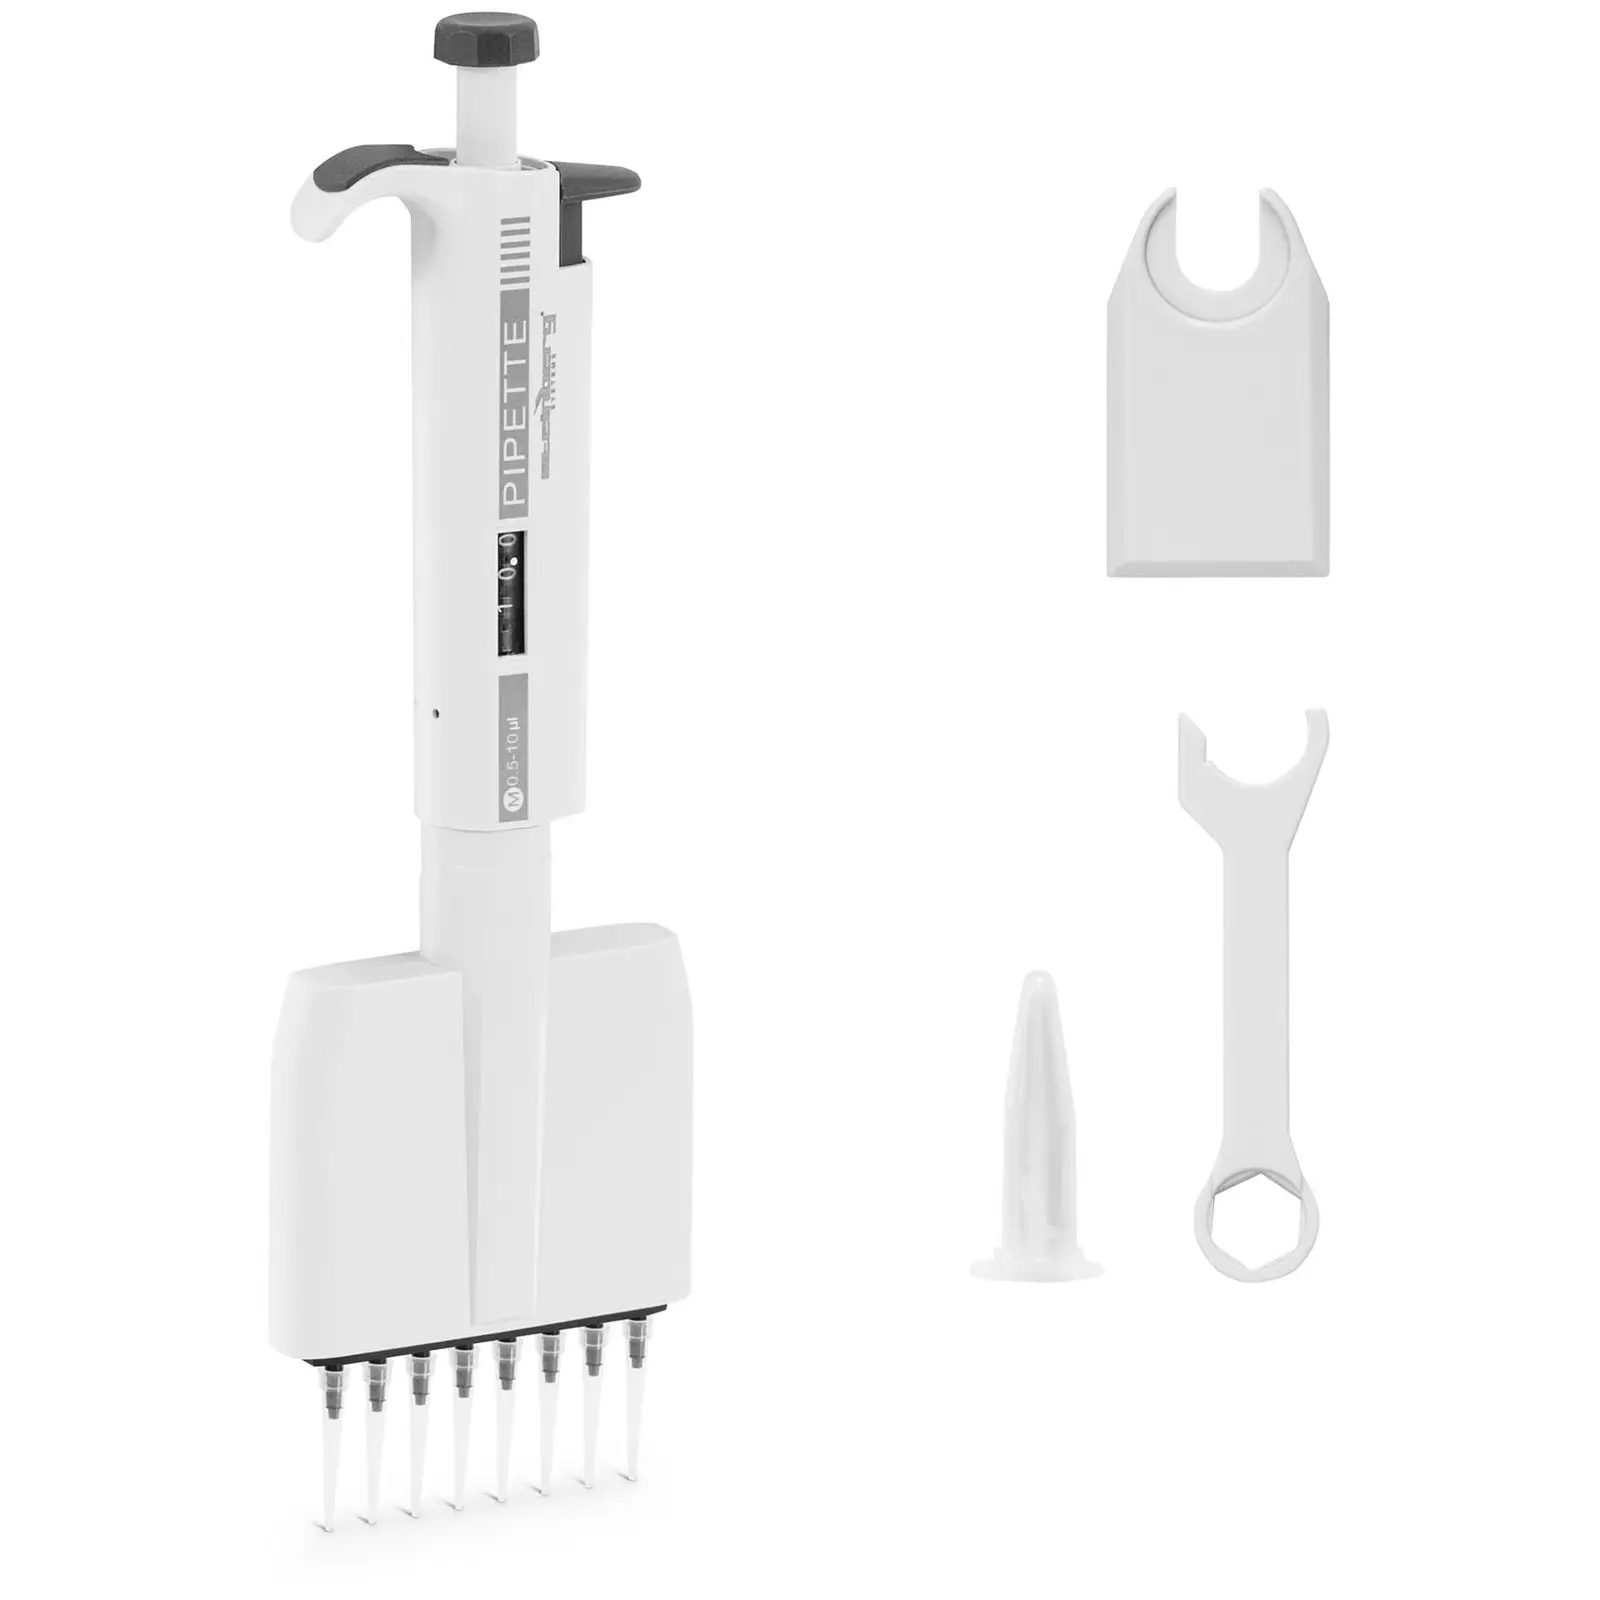 Multichannel pipette - for 8 tips - 0,0005 - 0,01 ml